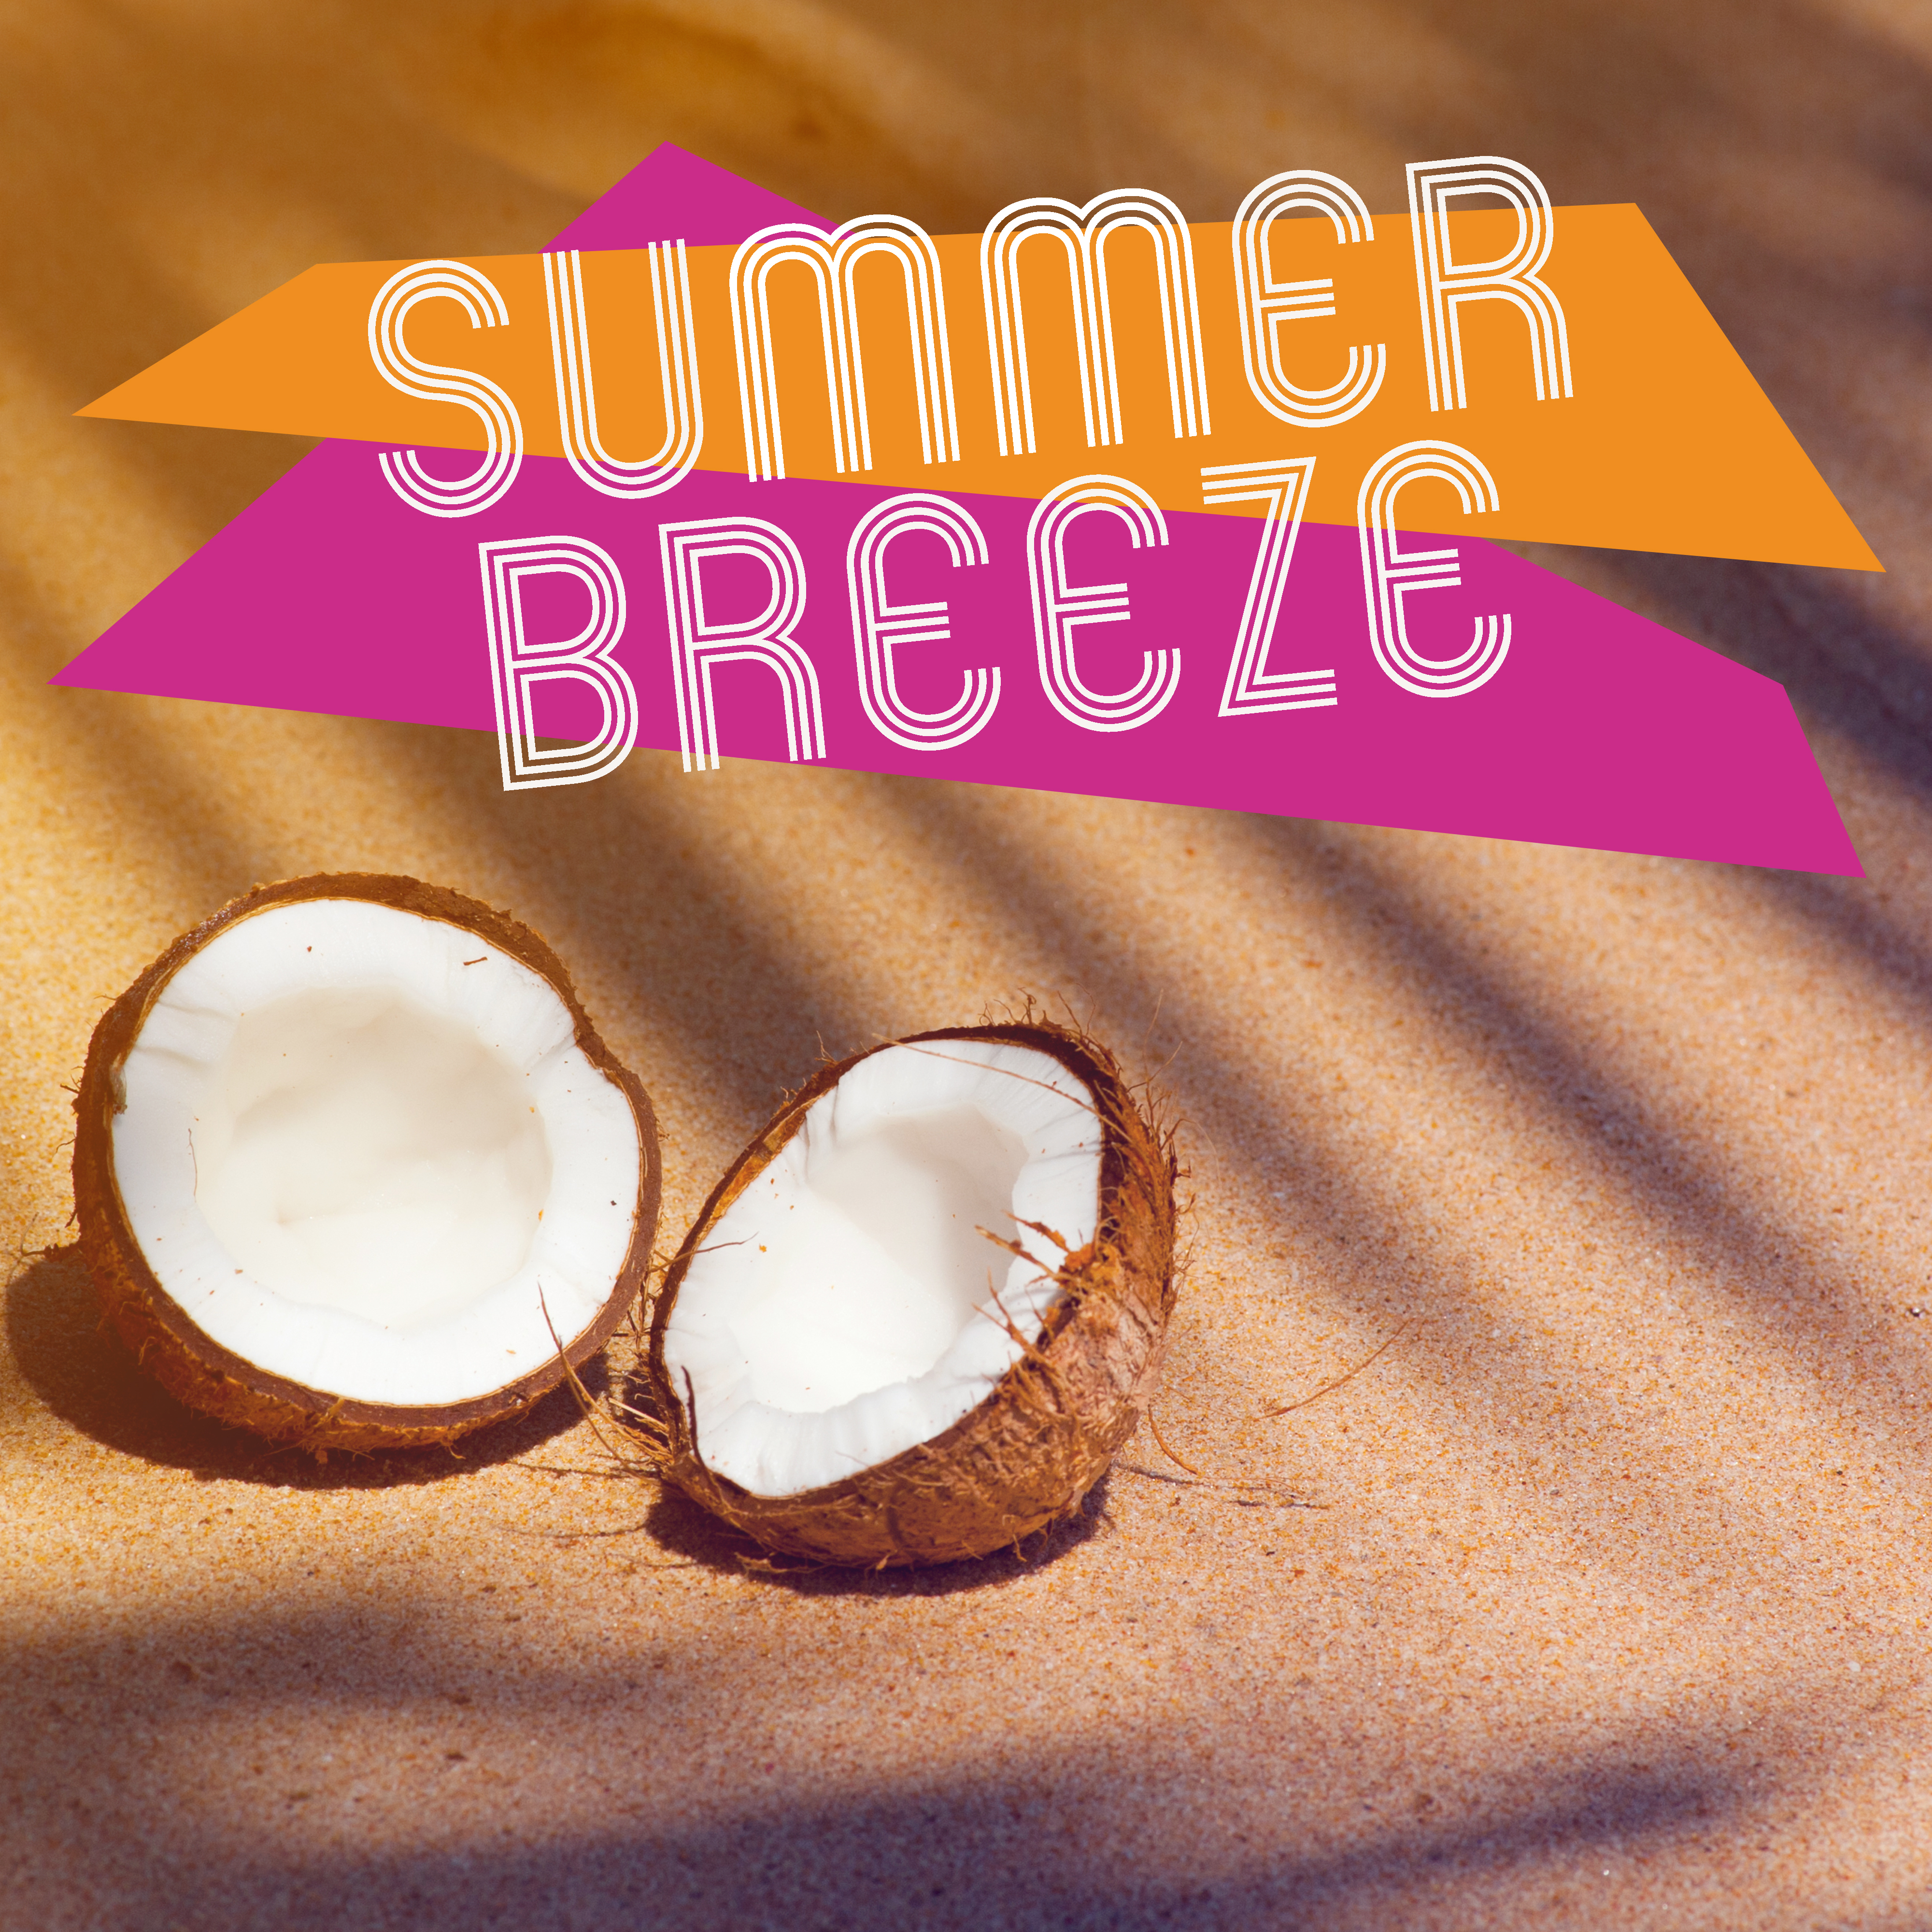 Summer Breeze  Holiday Chill Out, Pure Mind, Beach Party, Ibiza Summertime, Chill Paradise, Relaxing Music